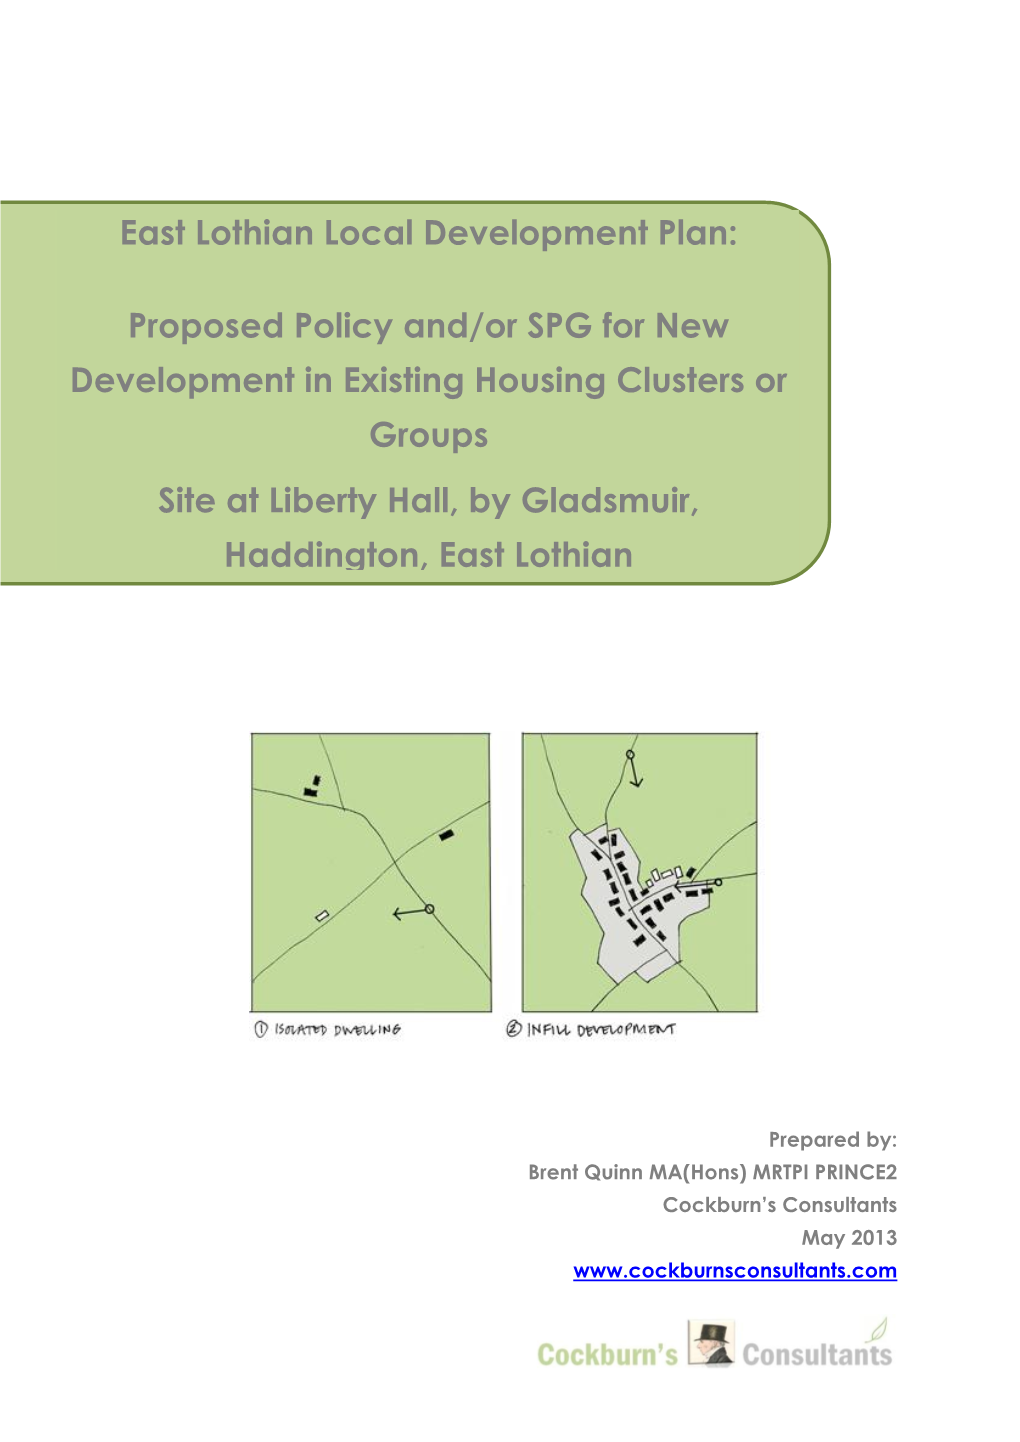 Proposed Policy And/Or SPG for New Development in Existing Housing